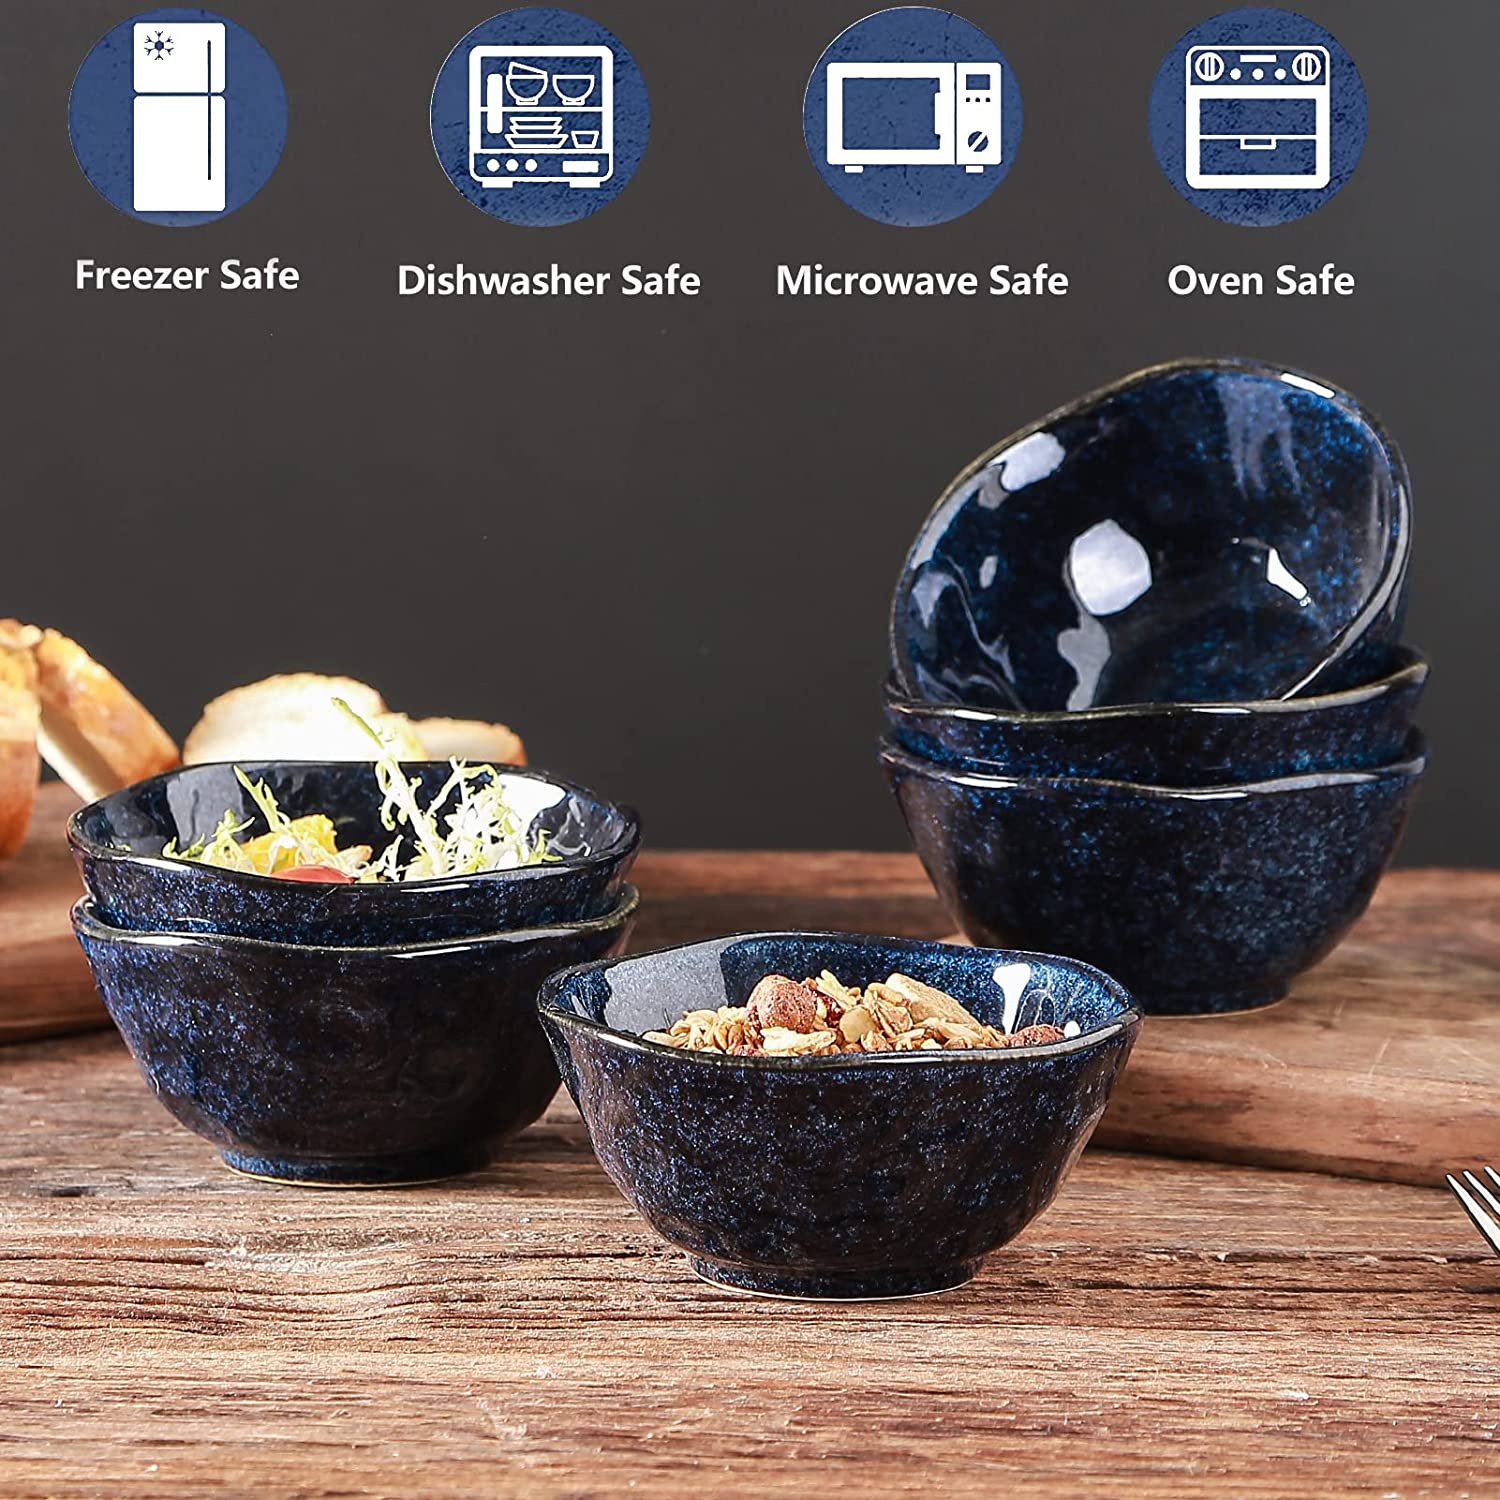 Vicrays Ceramic Small Dessert Bowls Set 10 oz, Set of 6, Microwave, Oven  and Dishwasher Safe, for Rice, Ice Cream, Soup, Snacks, Cereal, Chili, Side  Dishes etc, Kitchen Bowls Set(Starry Blue)